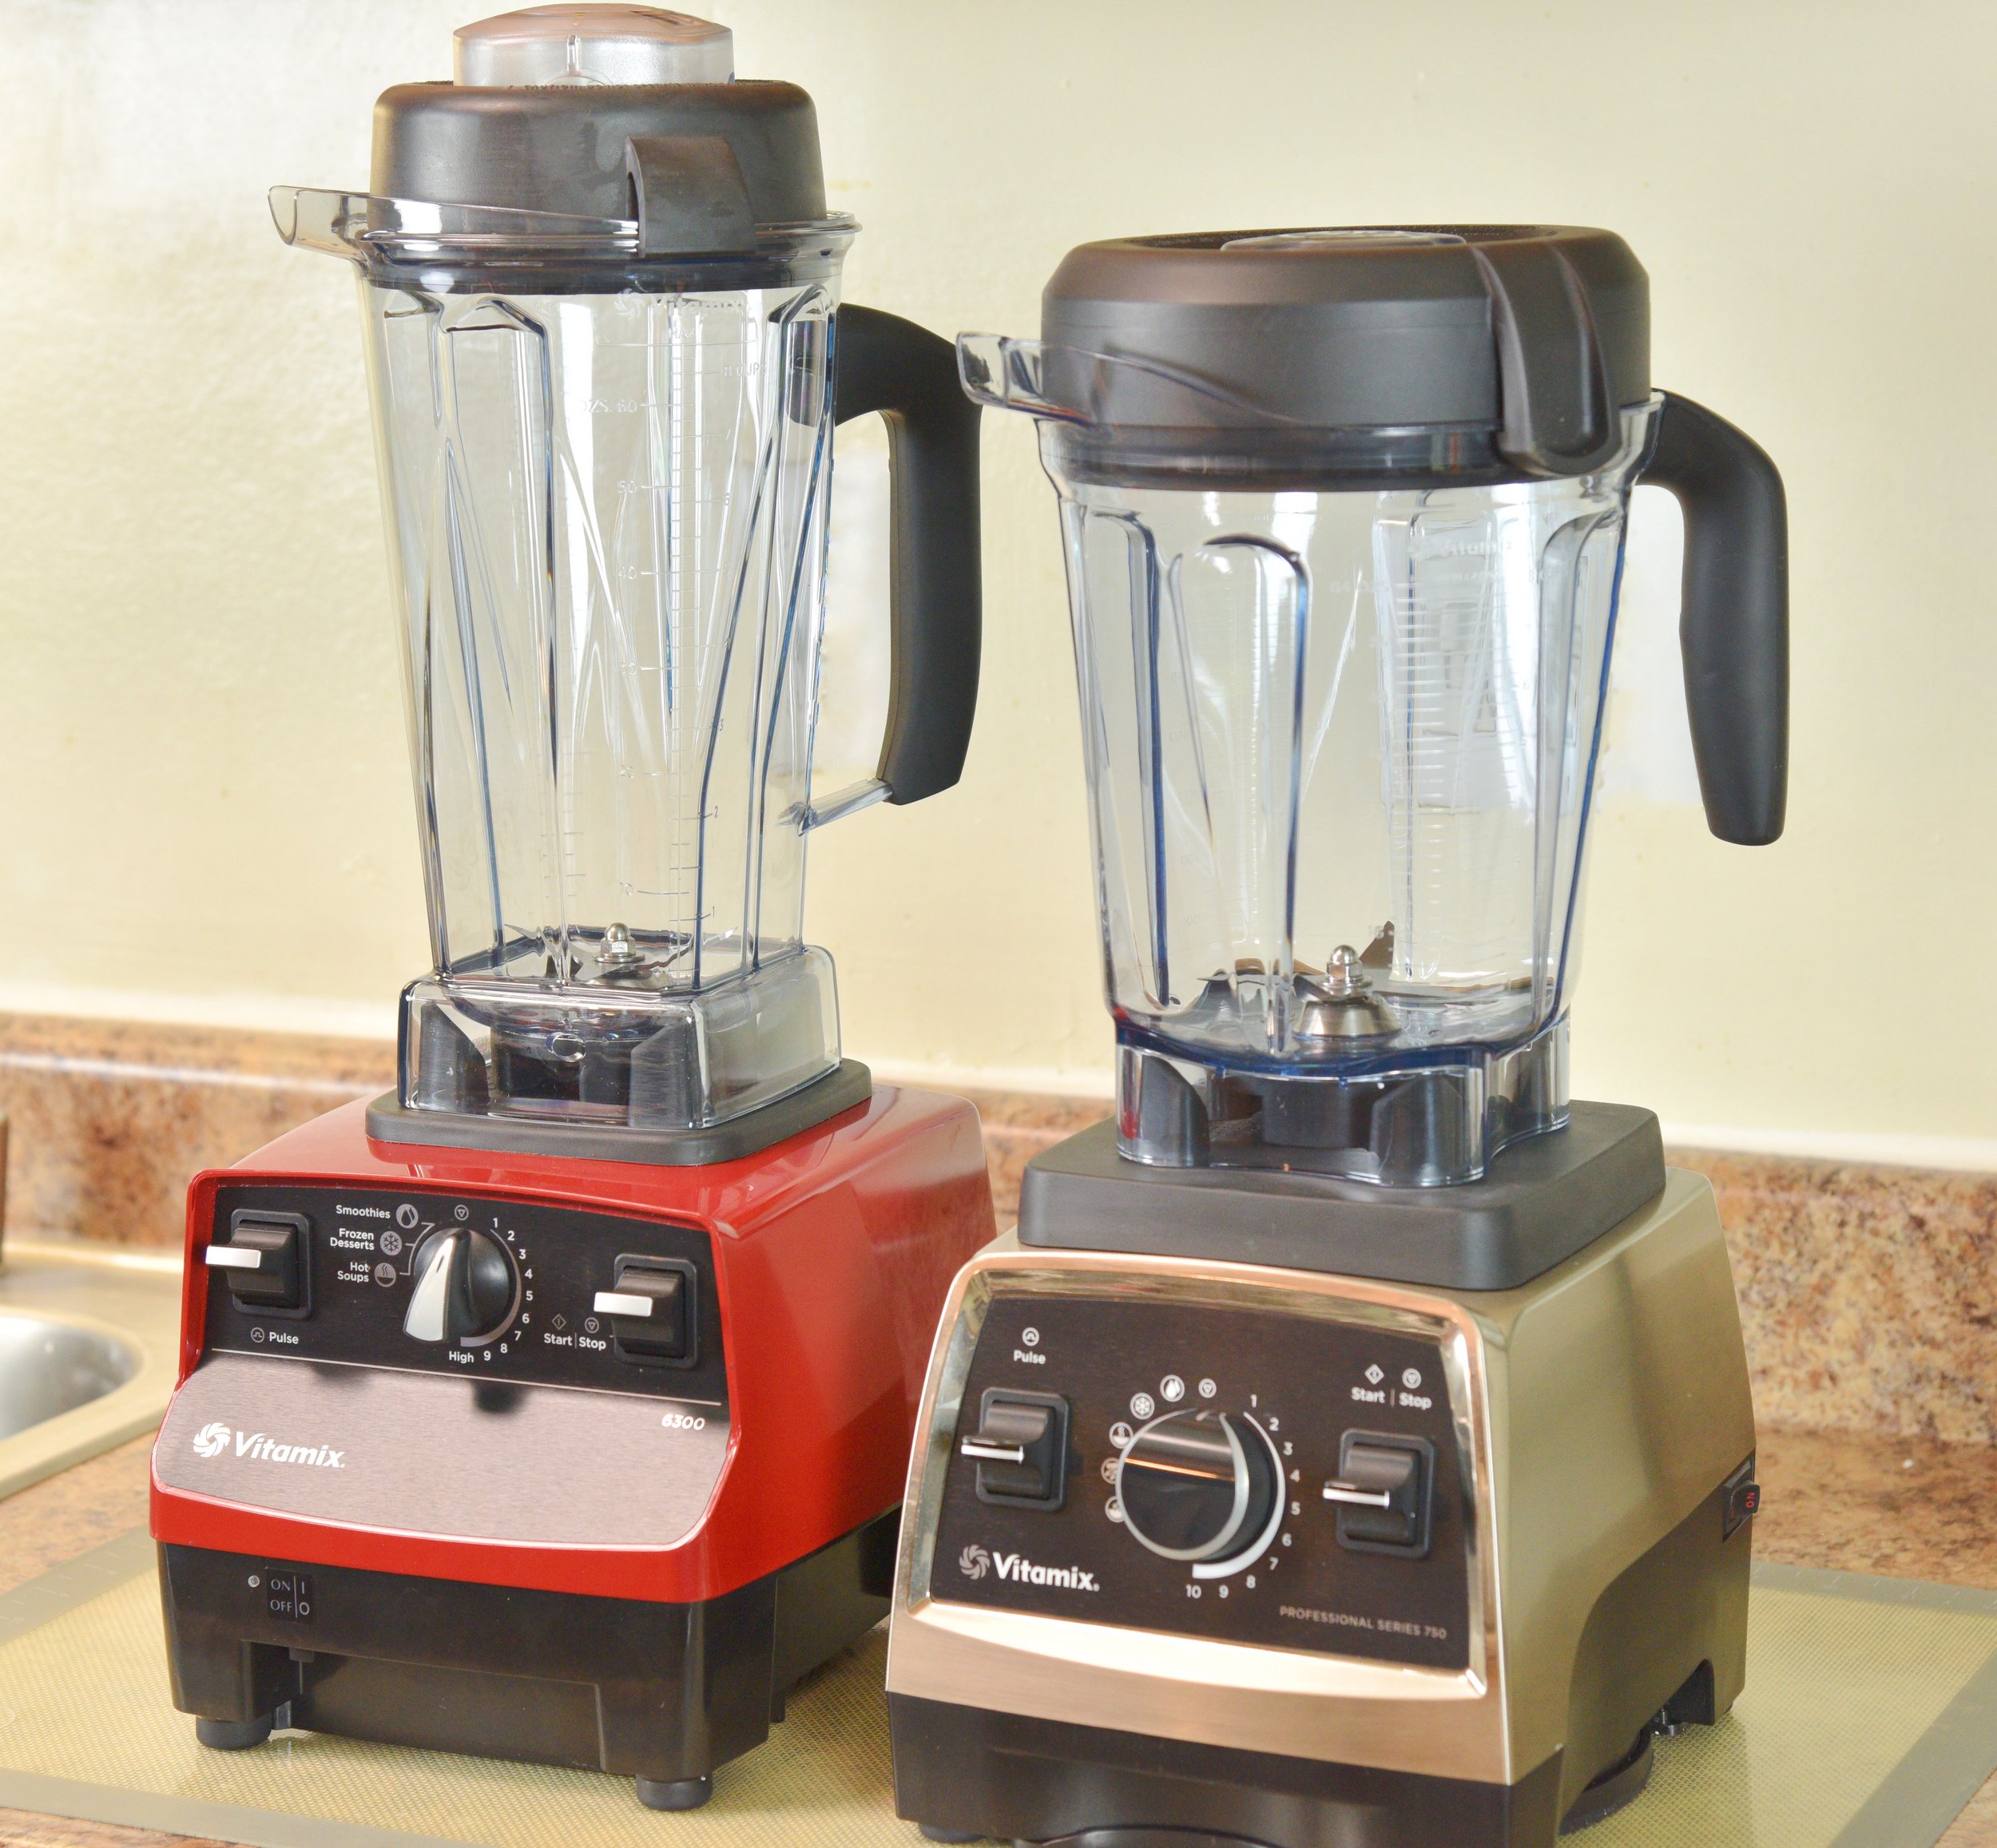 6 Best Vitamix Blenders 2023 Tested and Reviewed